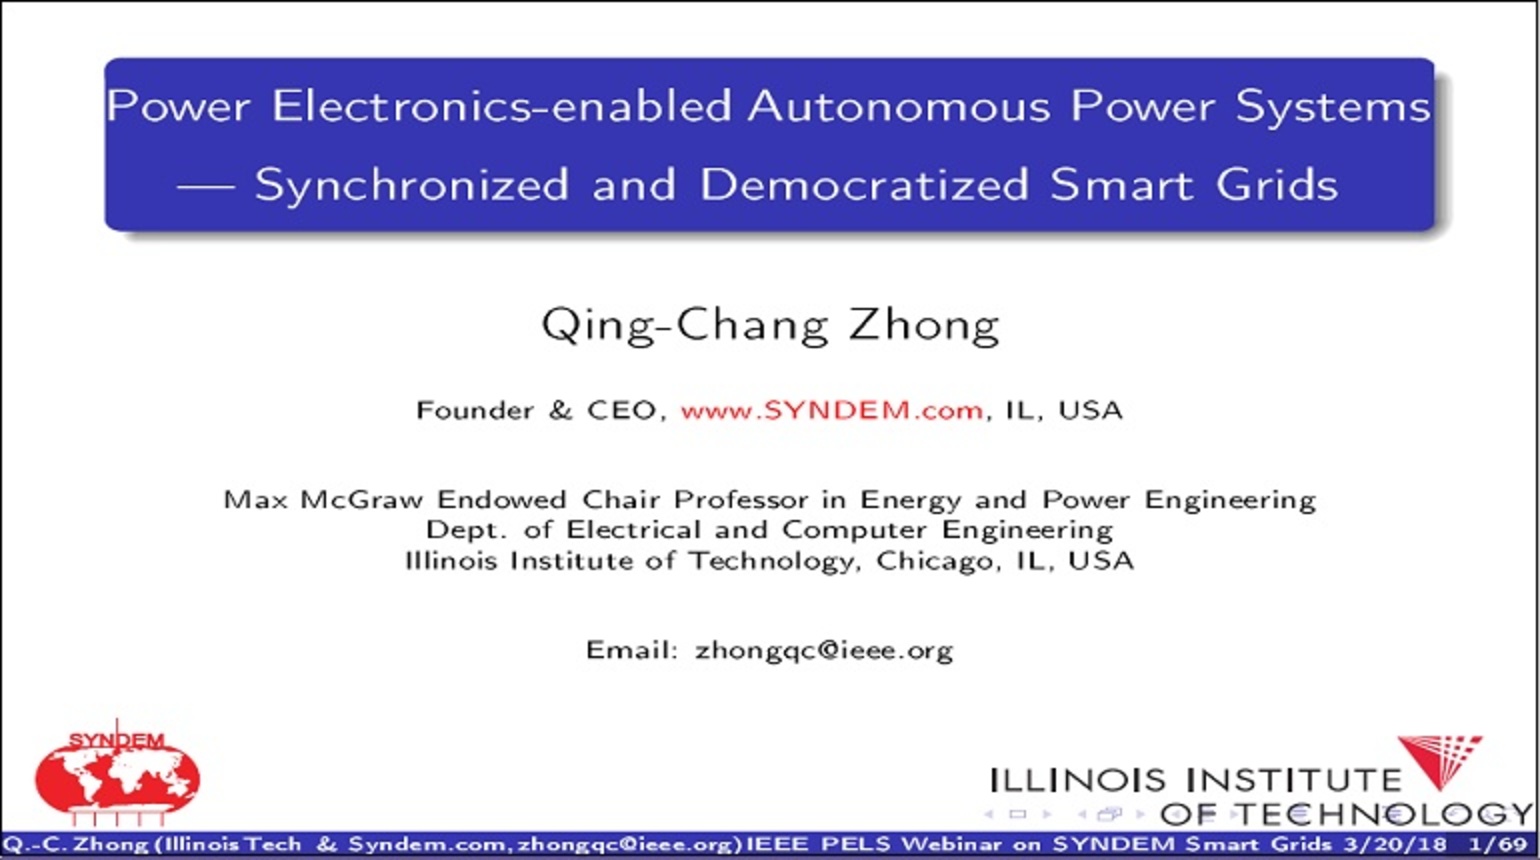 Power Electronics-Enabled Autonomous Power Systems - Synchronized and Democratized (SYNDEM) Smart Grids Video